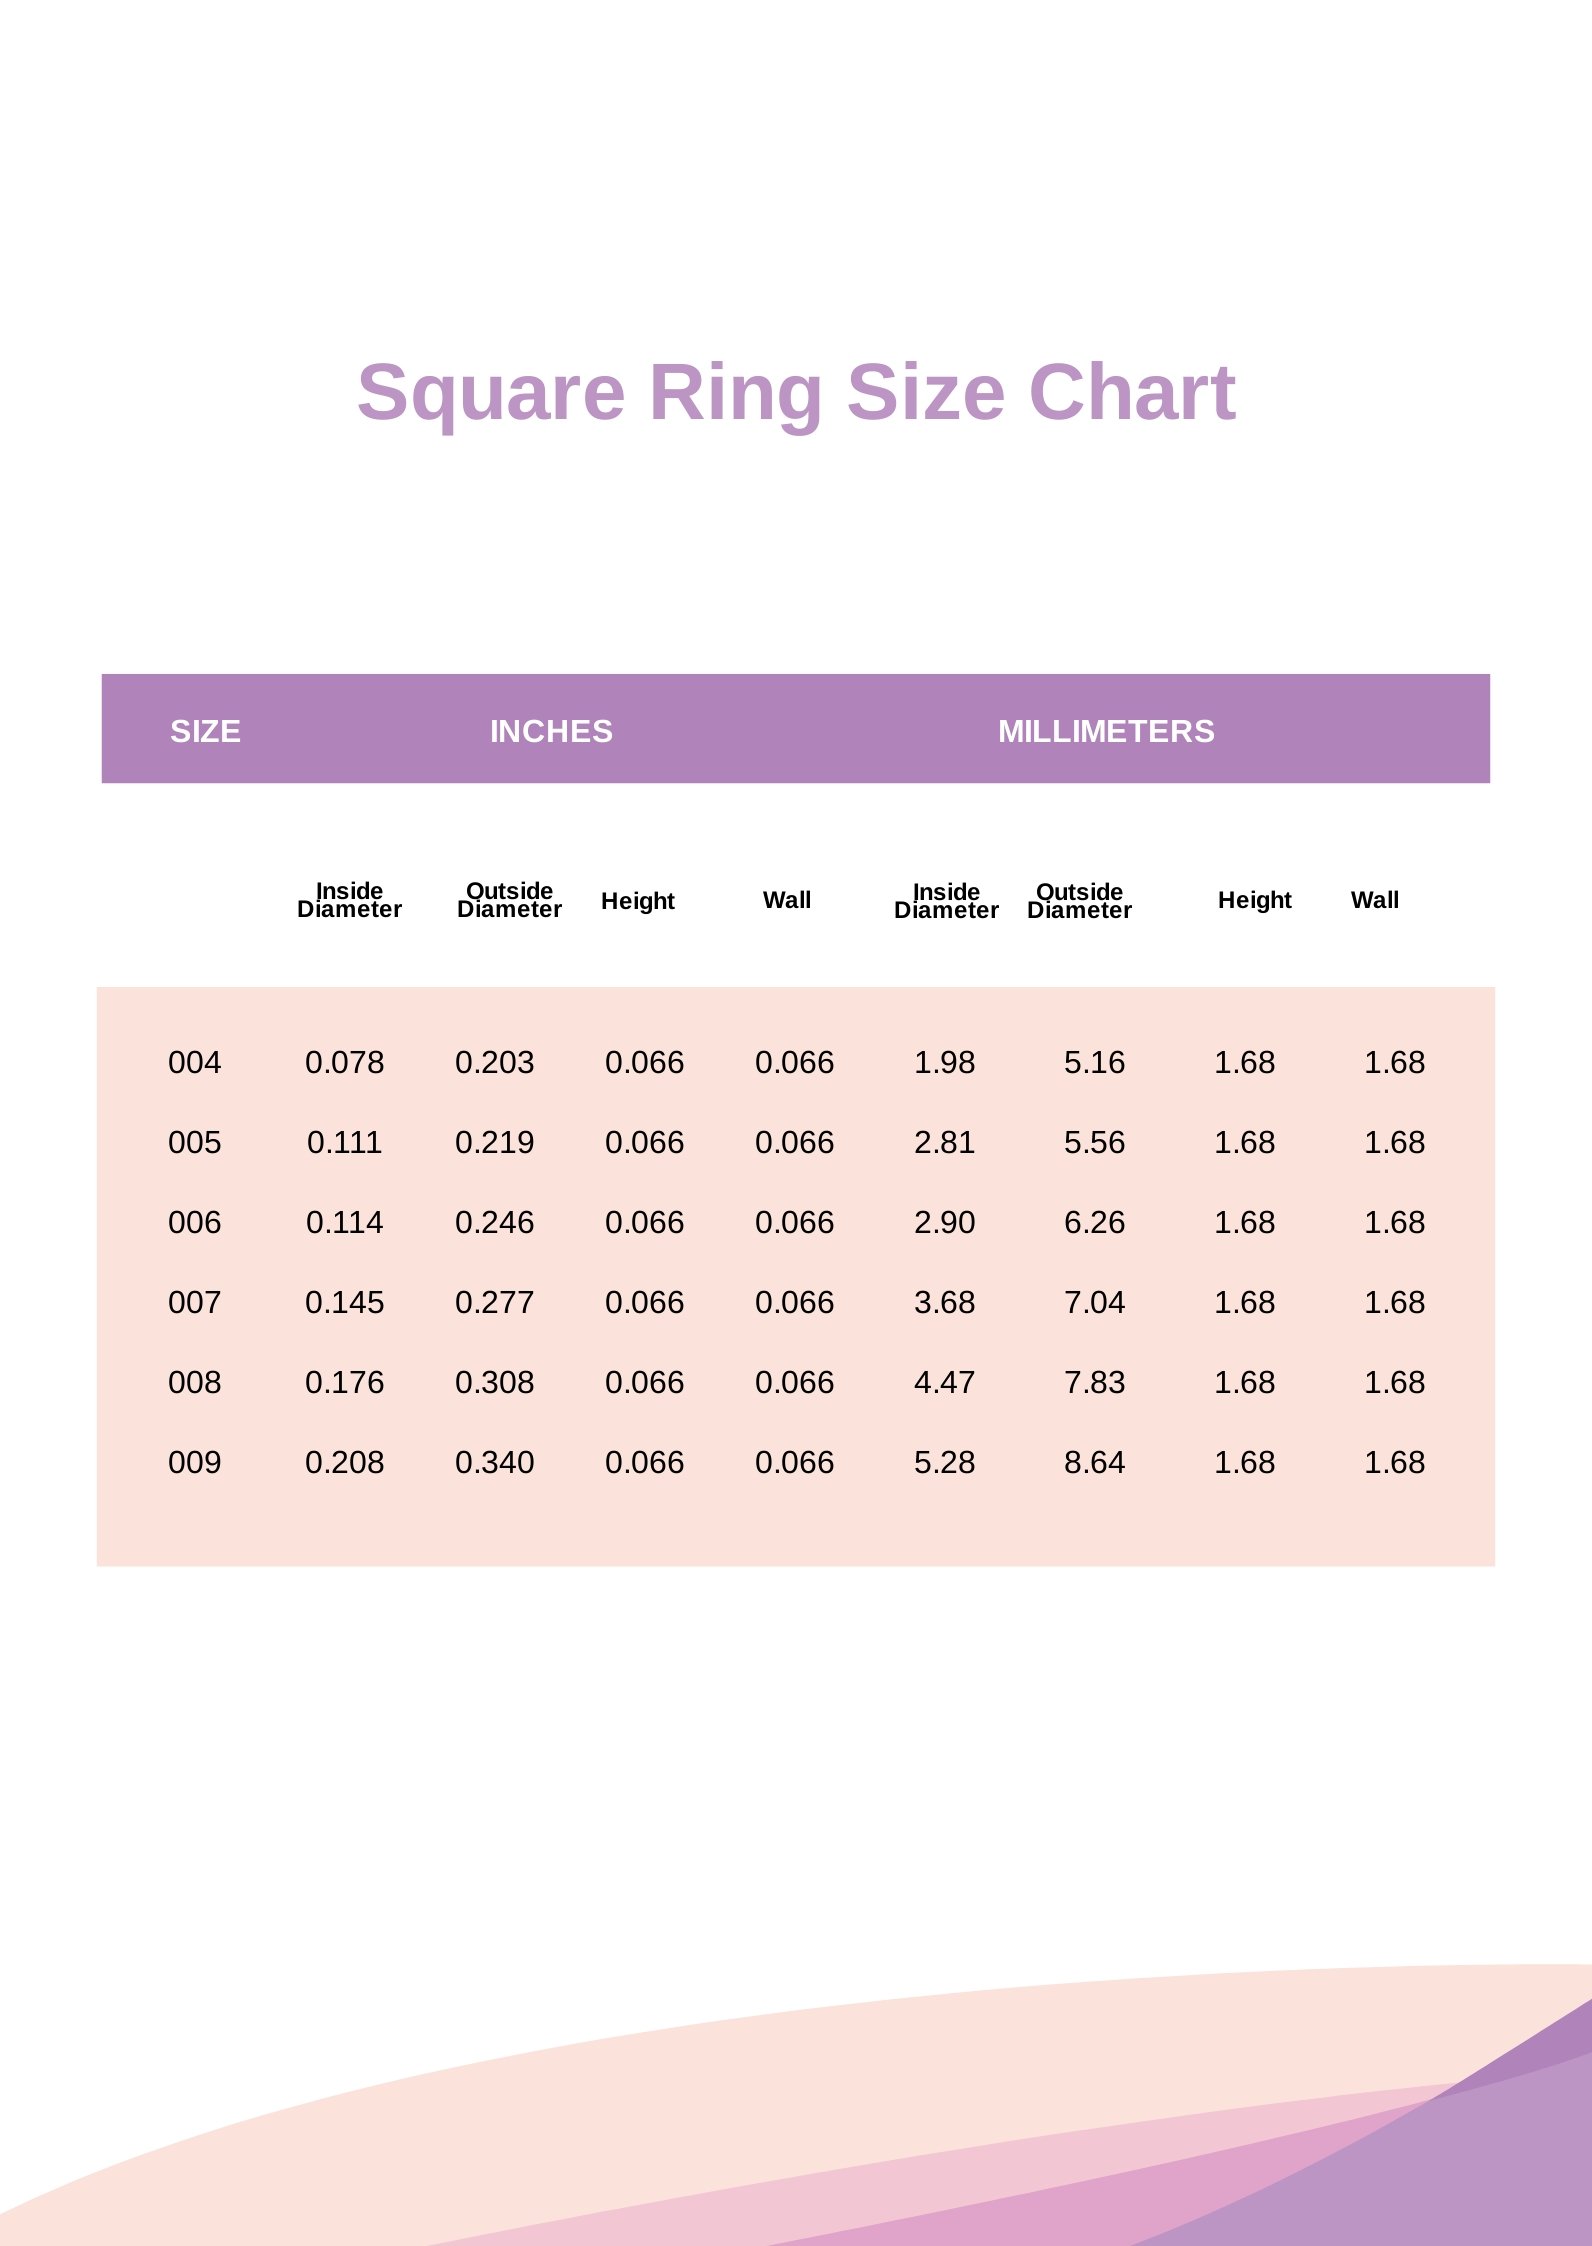 Square Ring Size Chart in PDF - Download